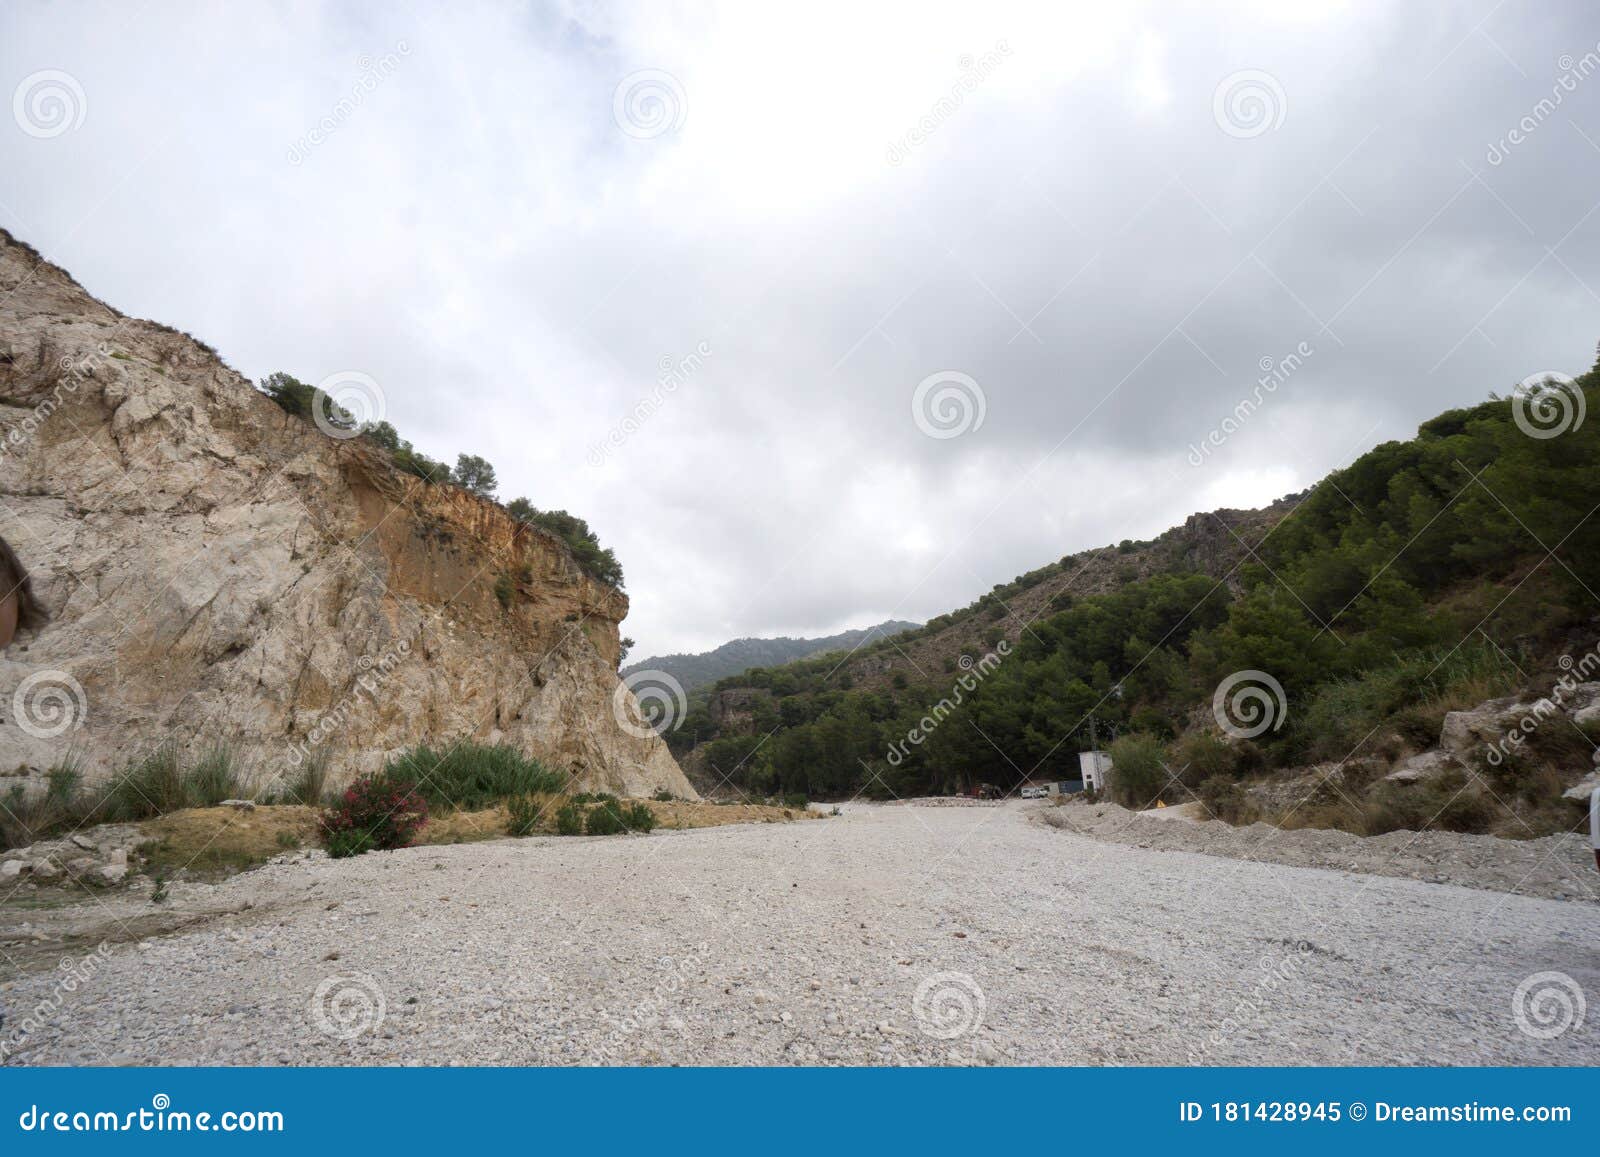 near the chillar river in nerja, andalusia